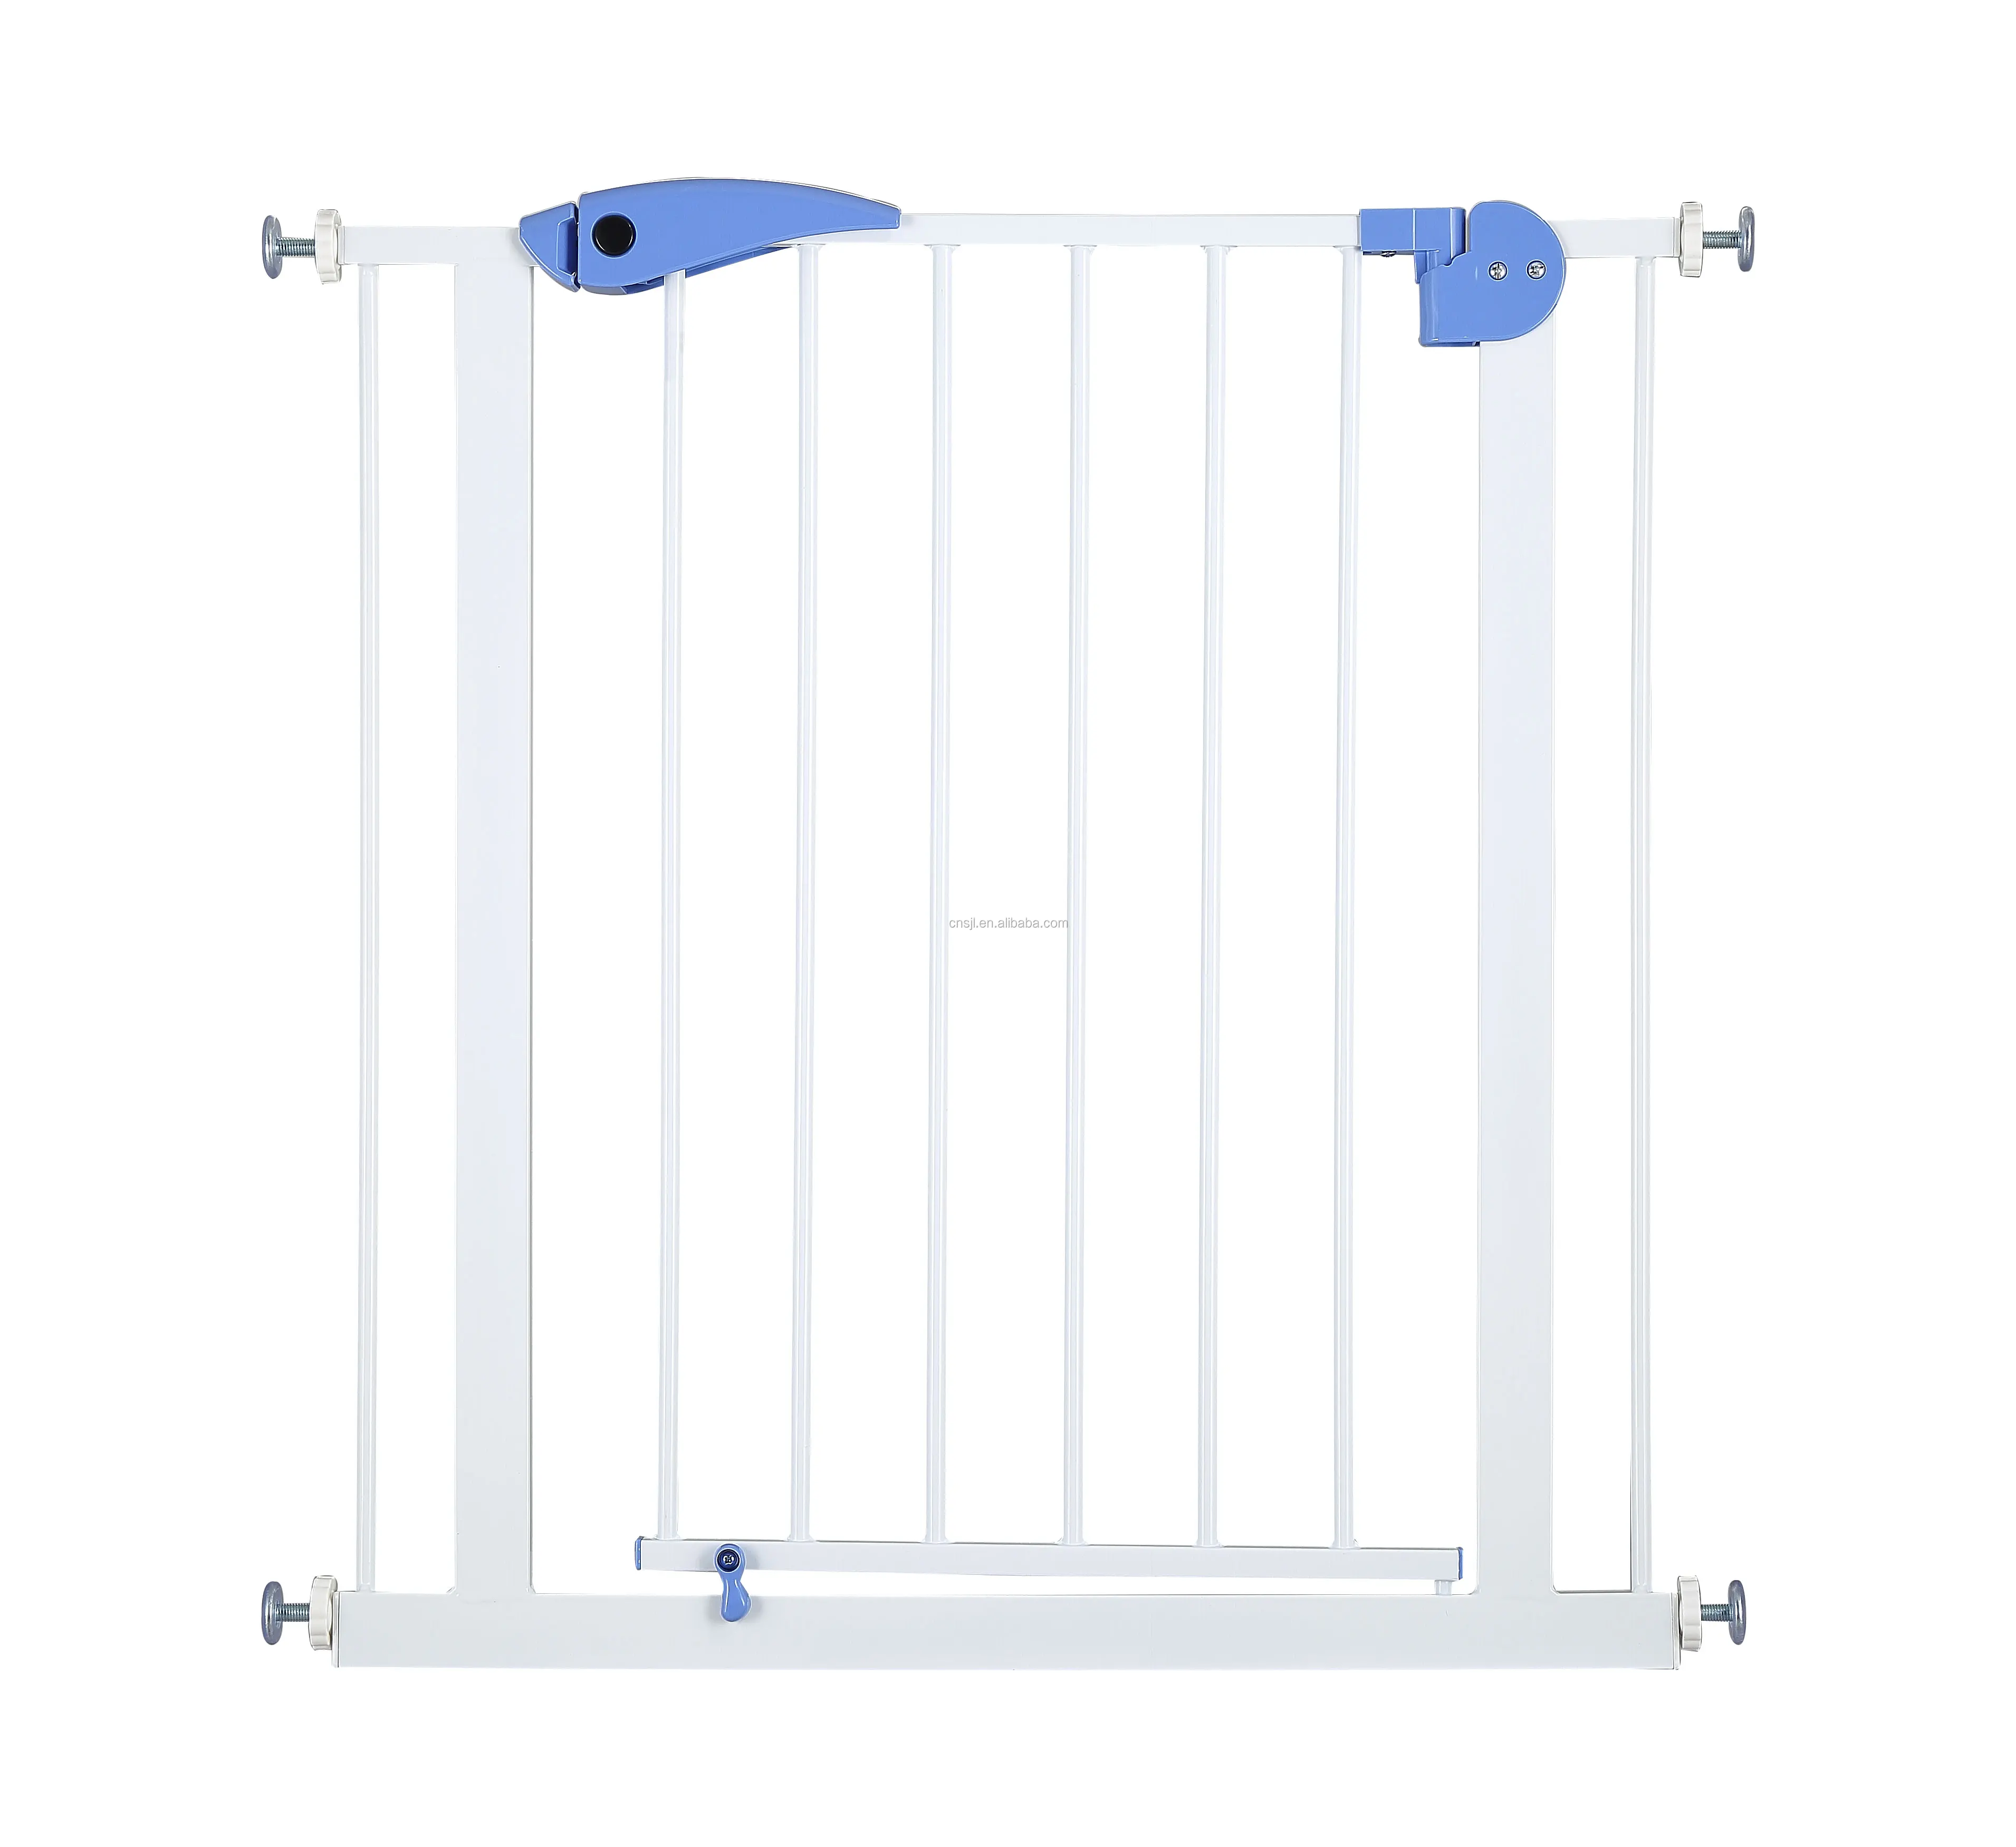 

New Sale Auto-Close Pet Safety Gate Modern Stainless Steel Panels Baby Safety Fence Gates Cute Design Isolation Door Gate, White+ blue/white+grey